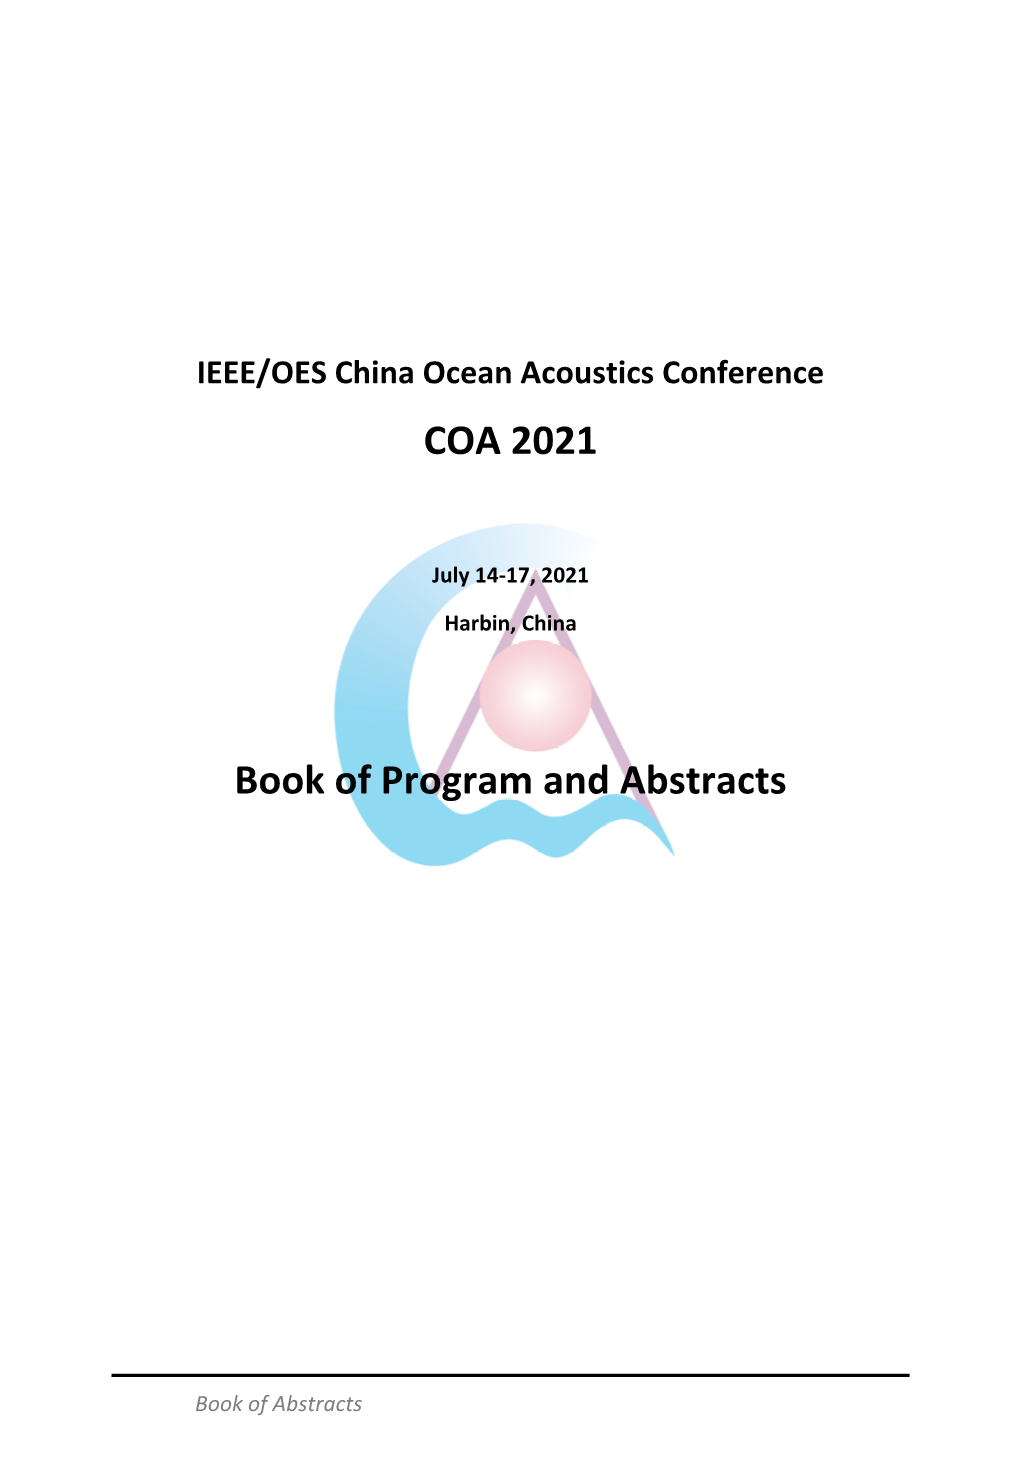 IEEE/OES China Ocean Acoustics Conference COA 2021